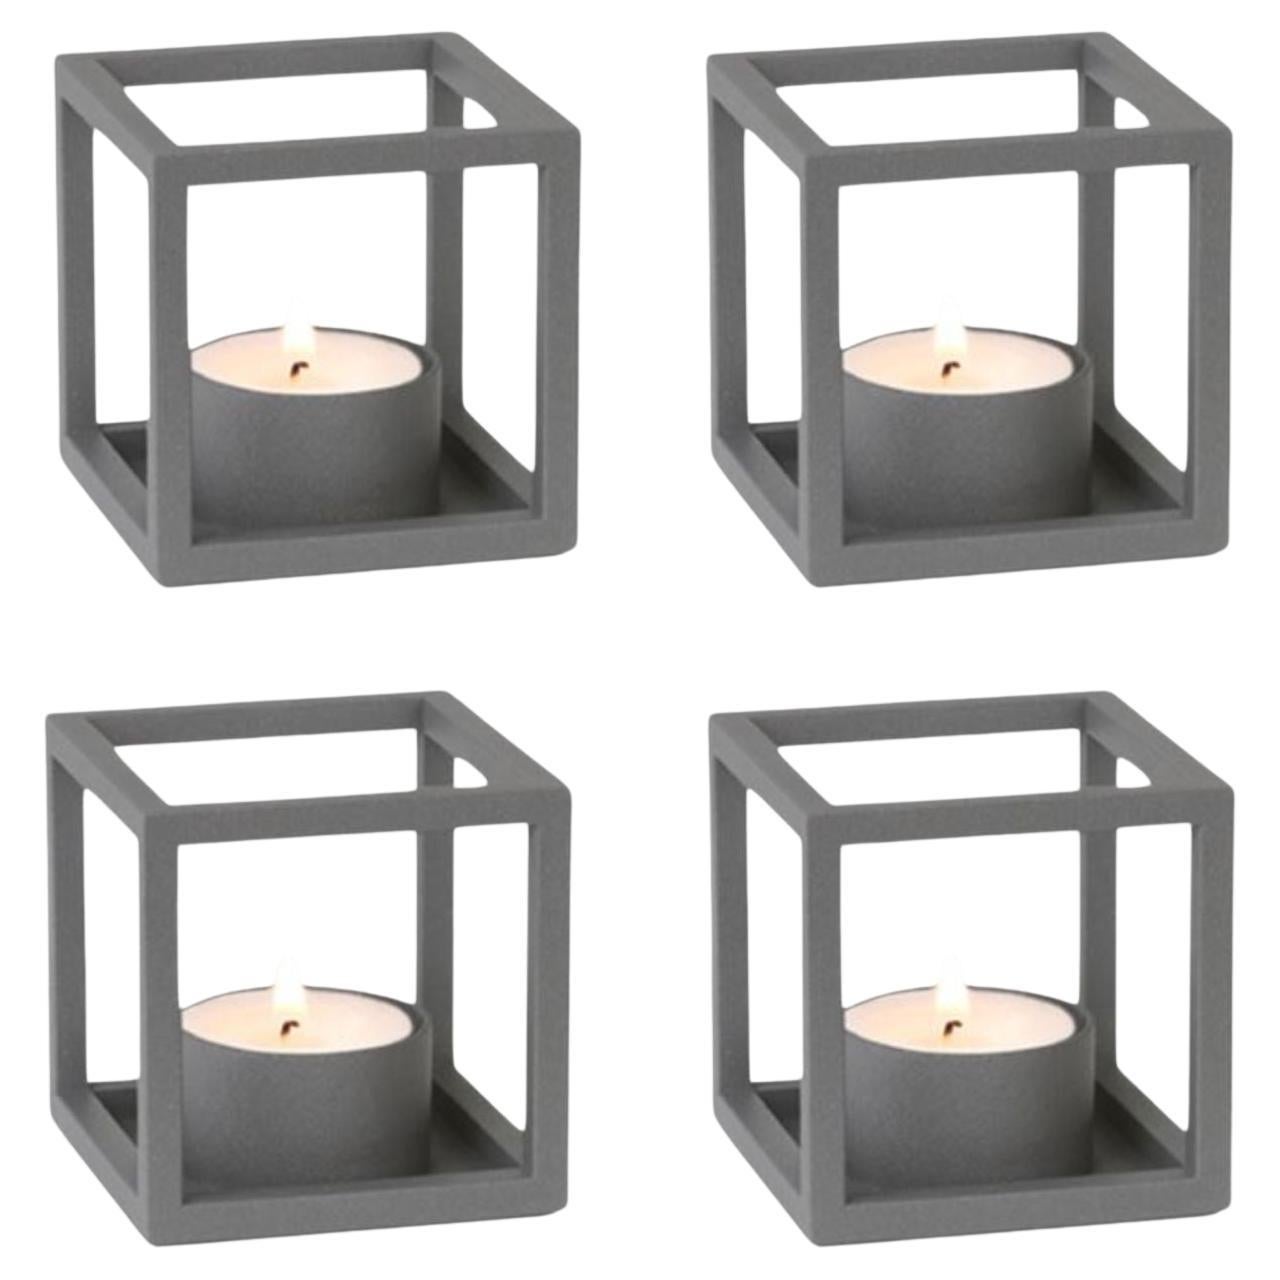 Set of 4 Grey Kubus T Candle Holders by Lassen